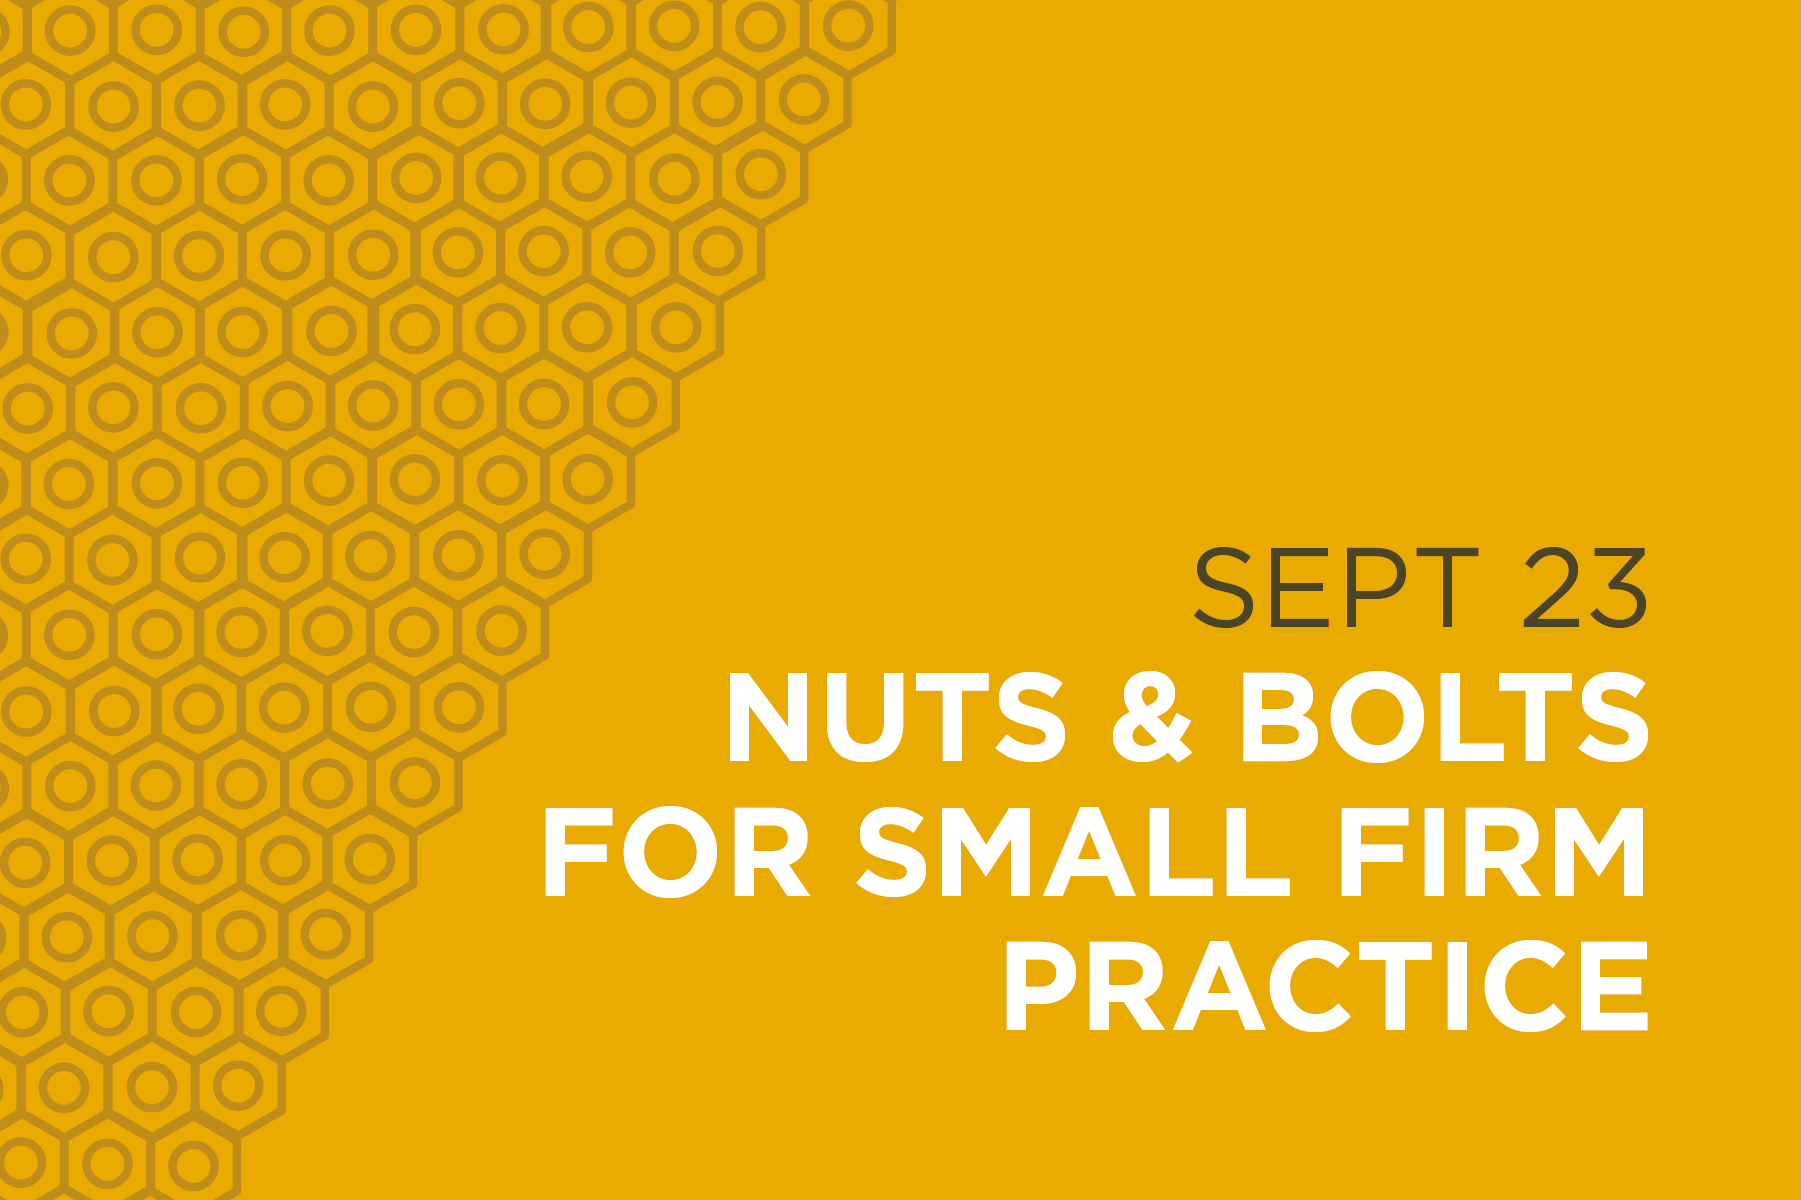 This page is intended only for participants of the Nuts and Bolts for Small Firm Practice workshop. Please check this page periodically for important updates for this upcoming event!